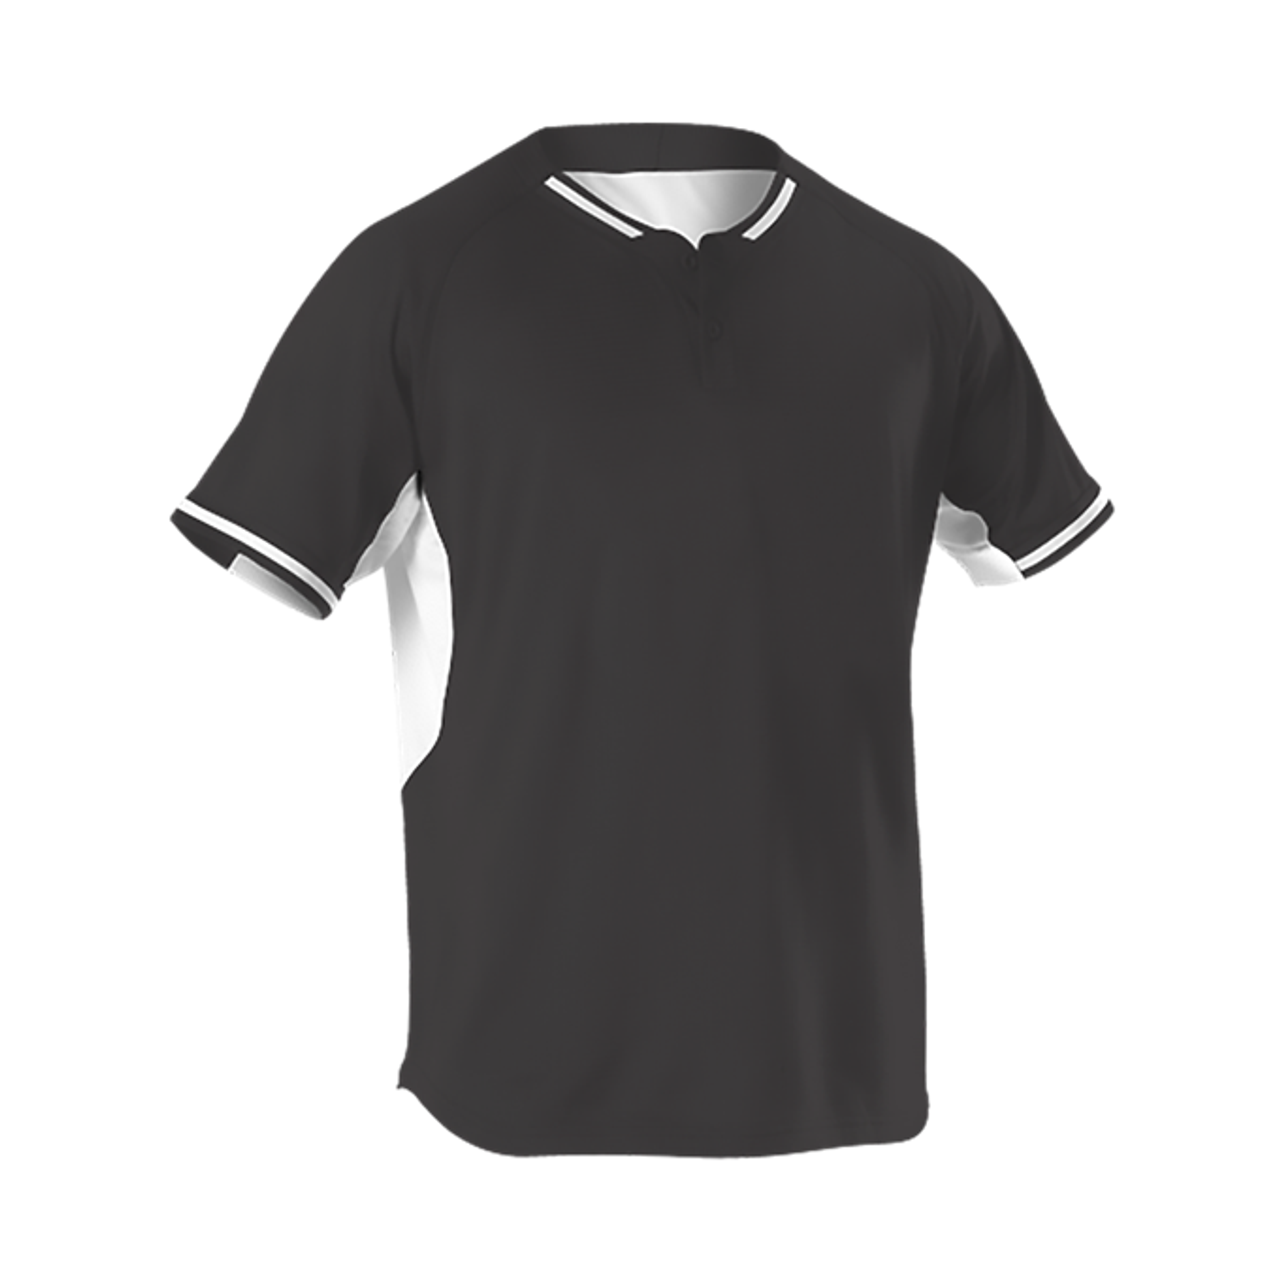 Referee Store | (New) NCAA Basketball Official Performance Mesh Shirt Black & White Adult X-Large